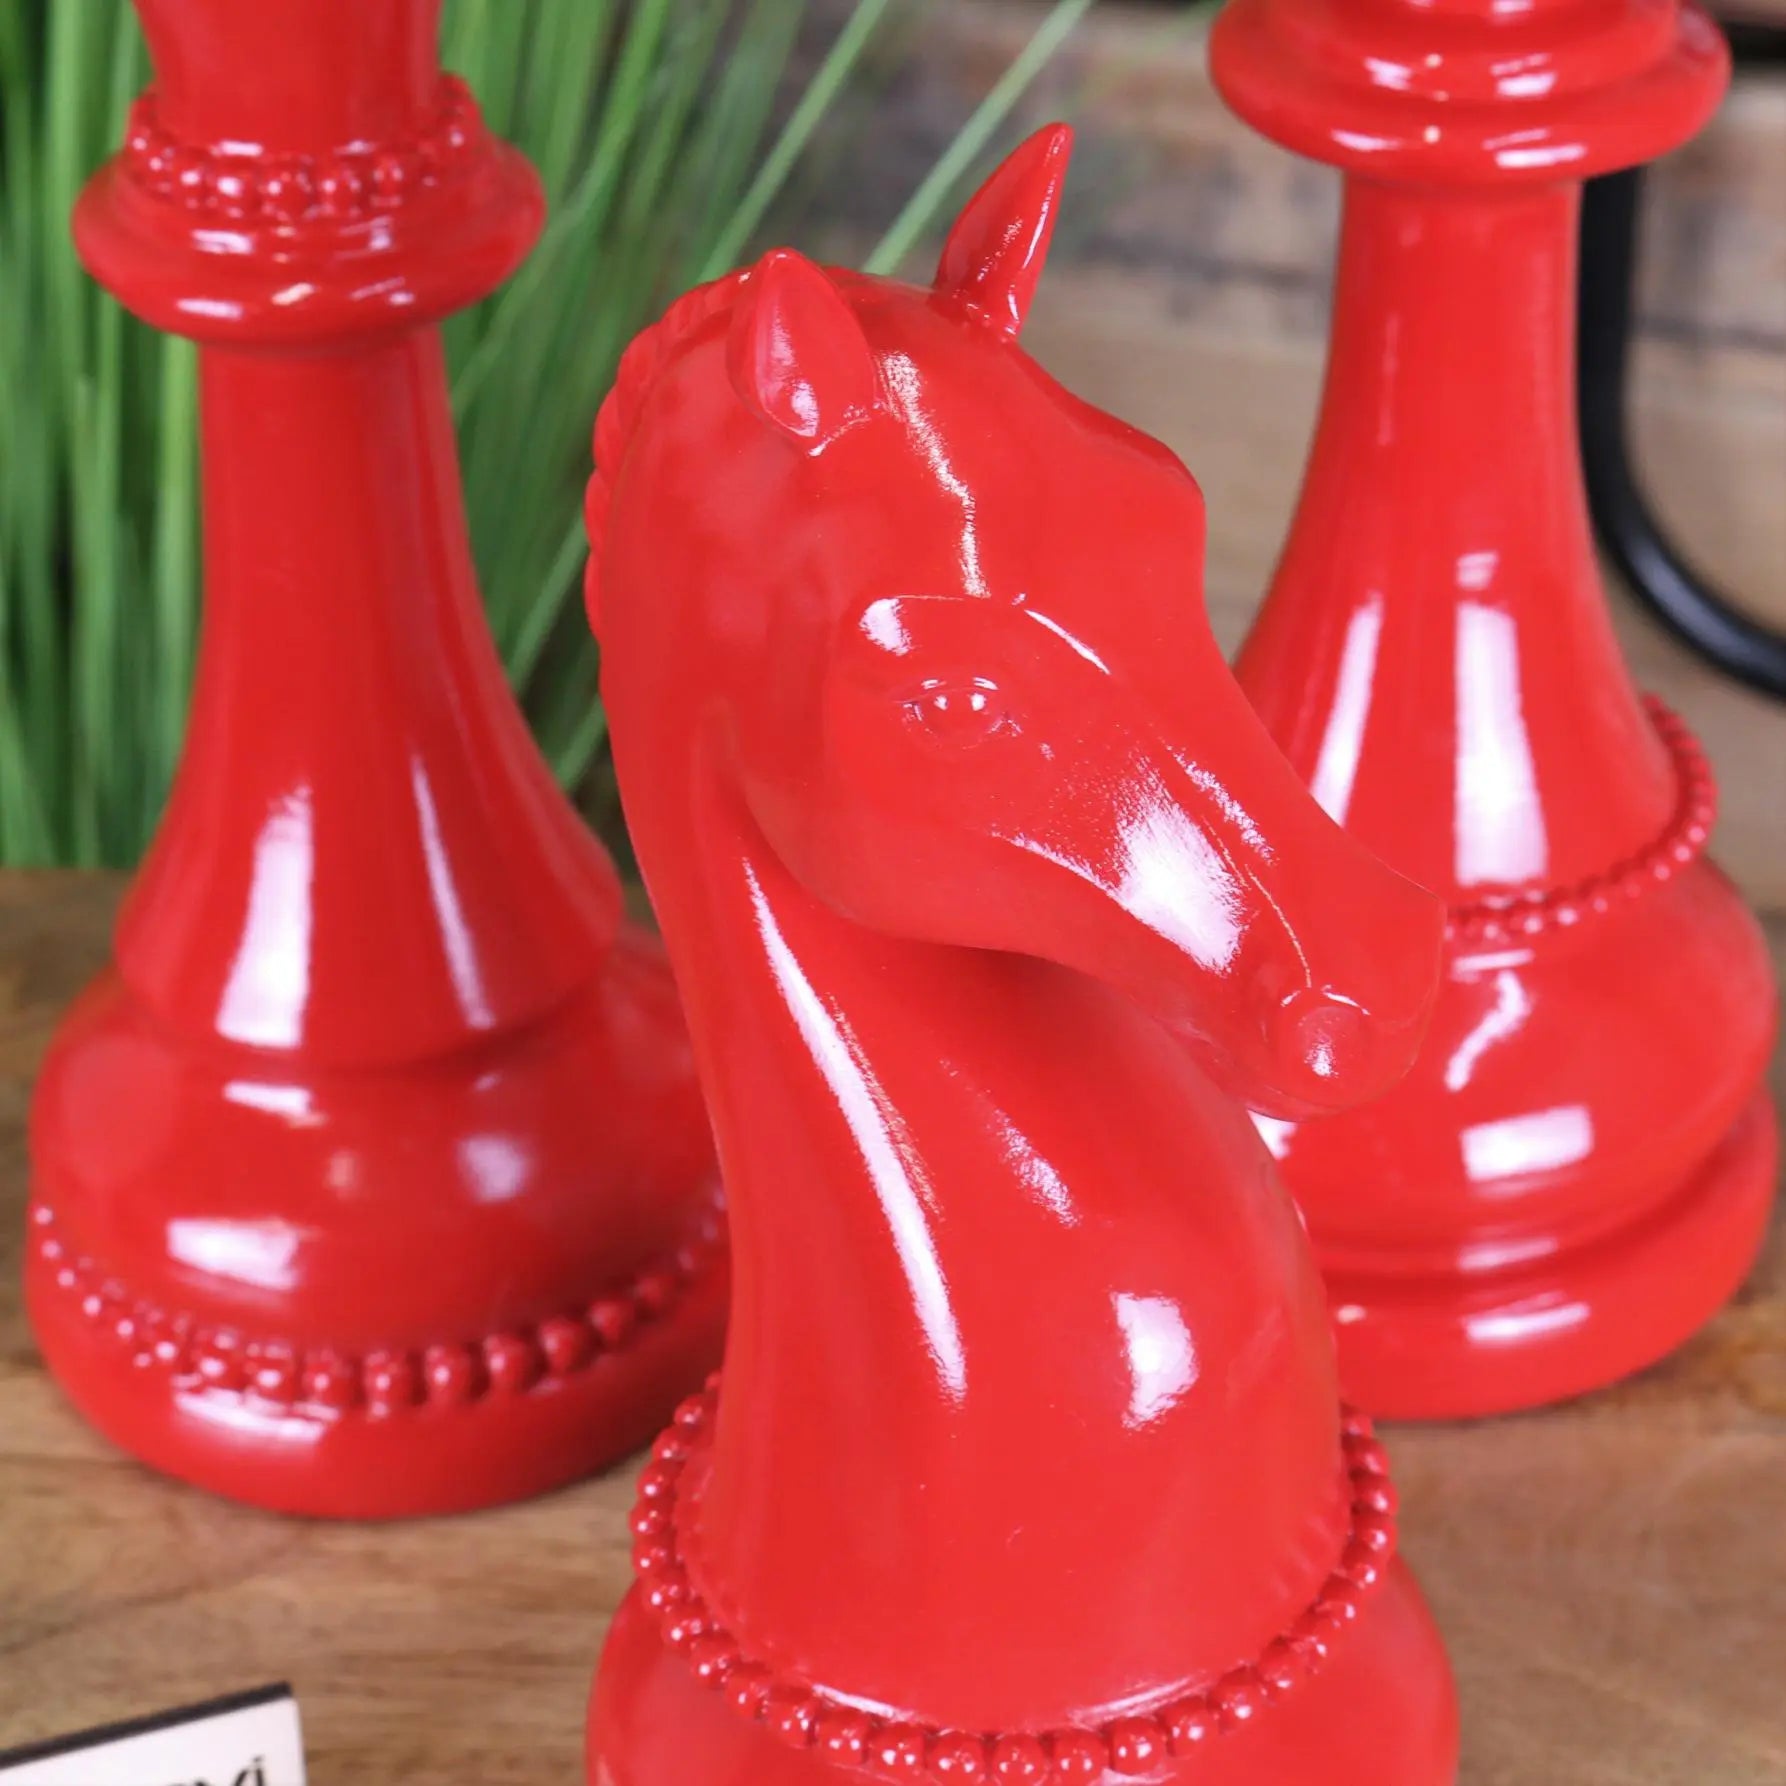 Shatranj Set of 3 Chess Pieces Ornaments Red Accent - Closeup of Knight